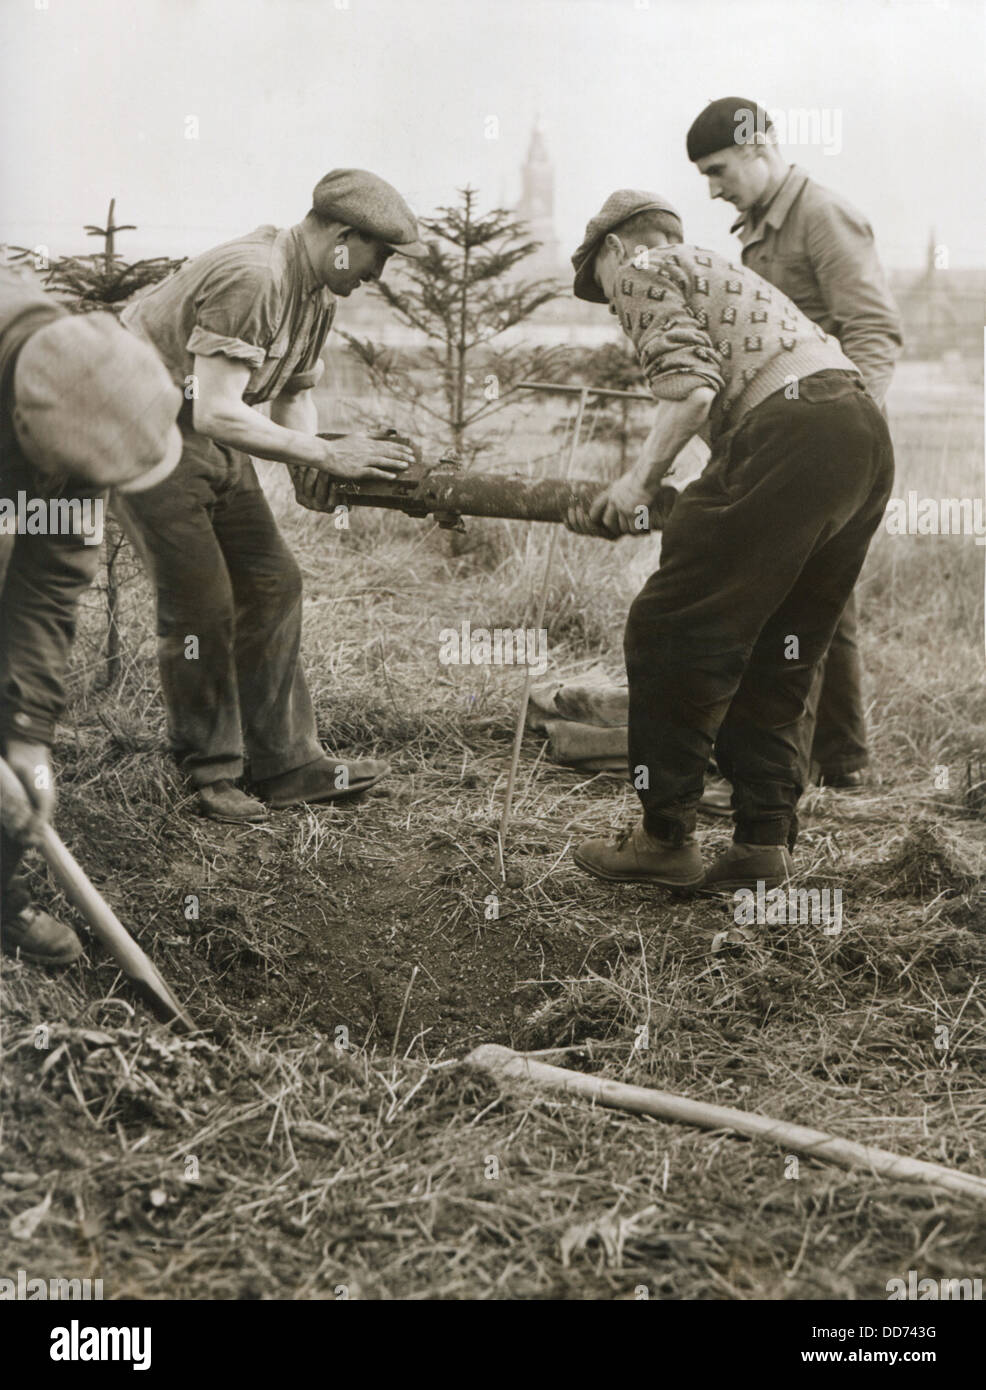 French workers unearthing WWI explosives from the French Frontier zone in 1936. In the early 21st century, the French Stock Photo